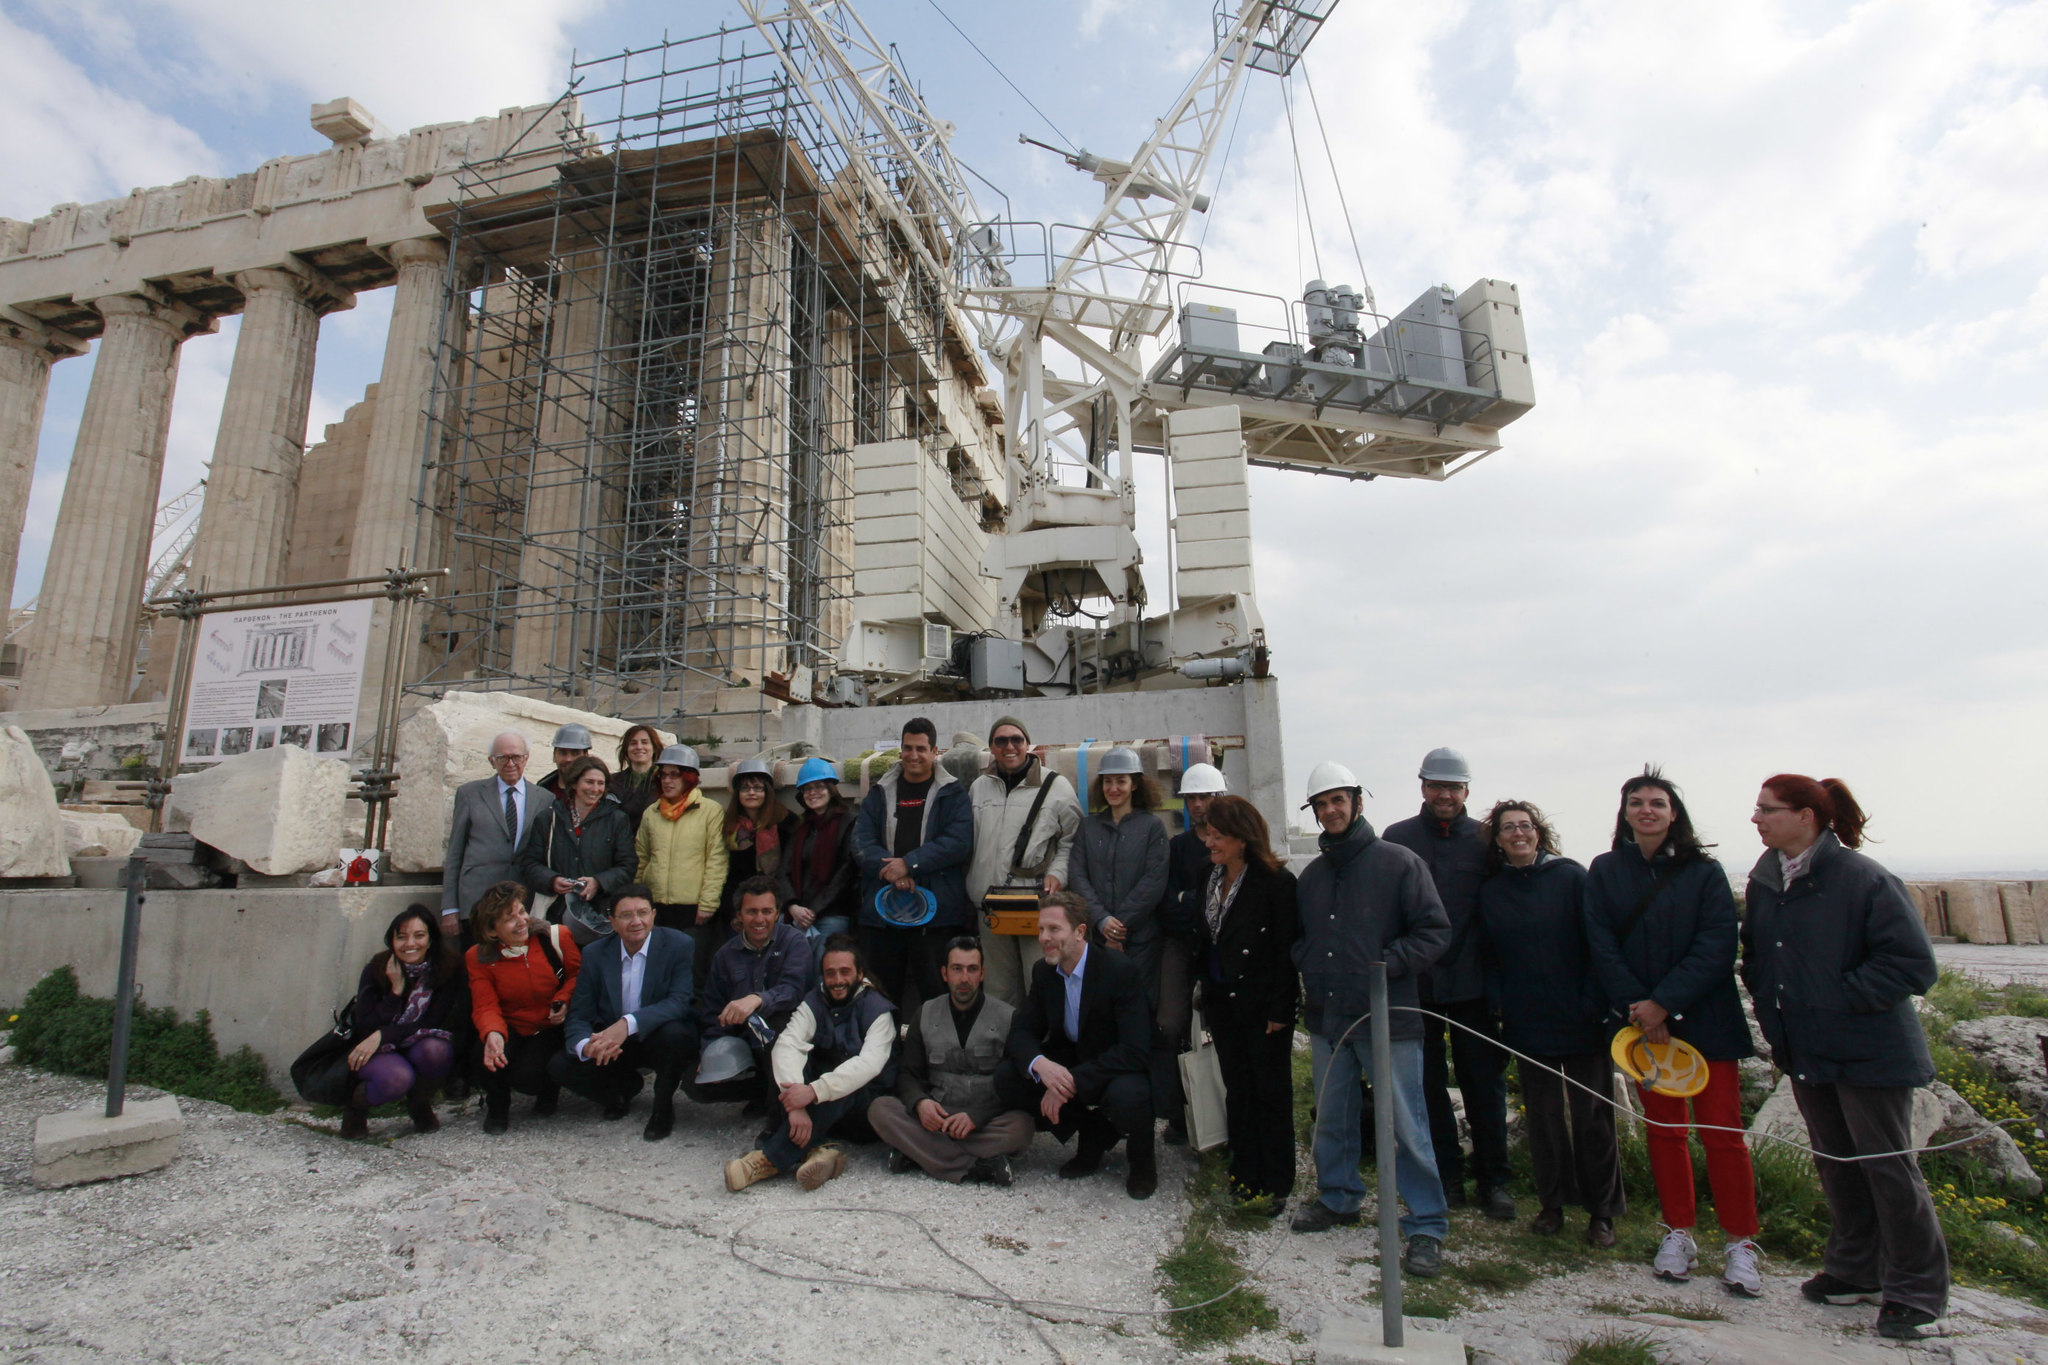 A group poses in front of ancient Greek ruins covered in scaffolding. Some people wear hard hats.